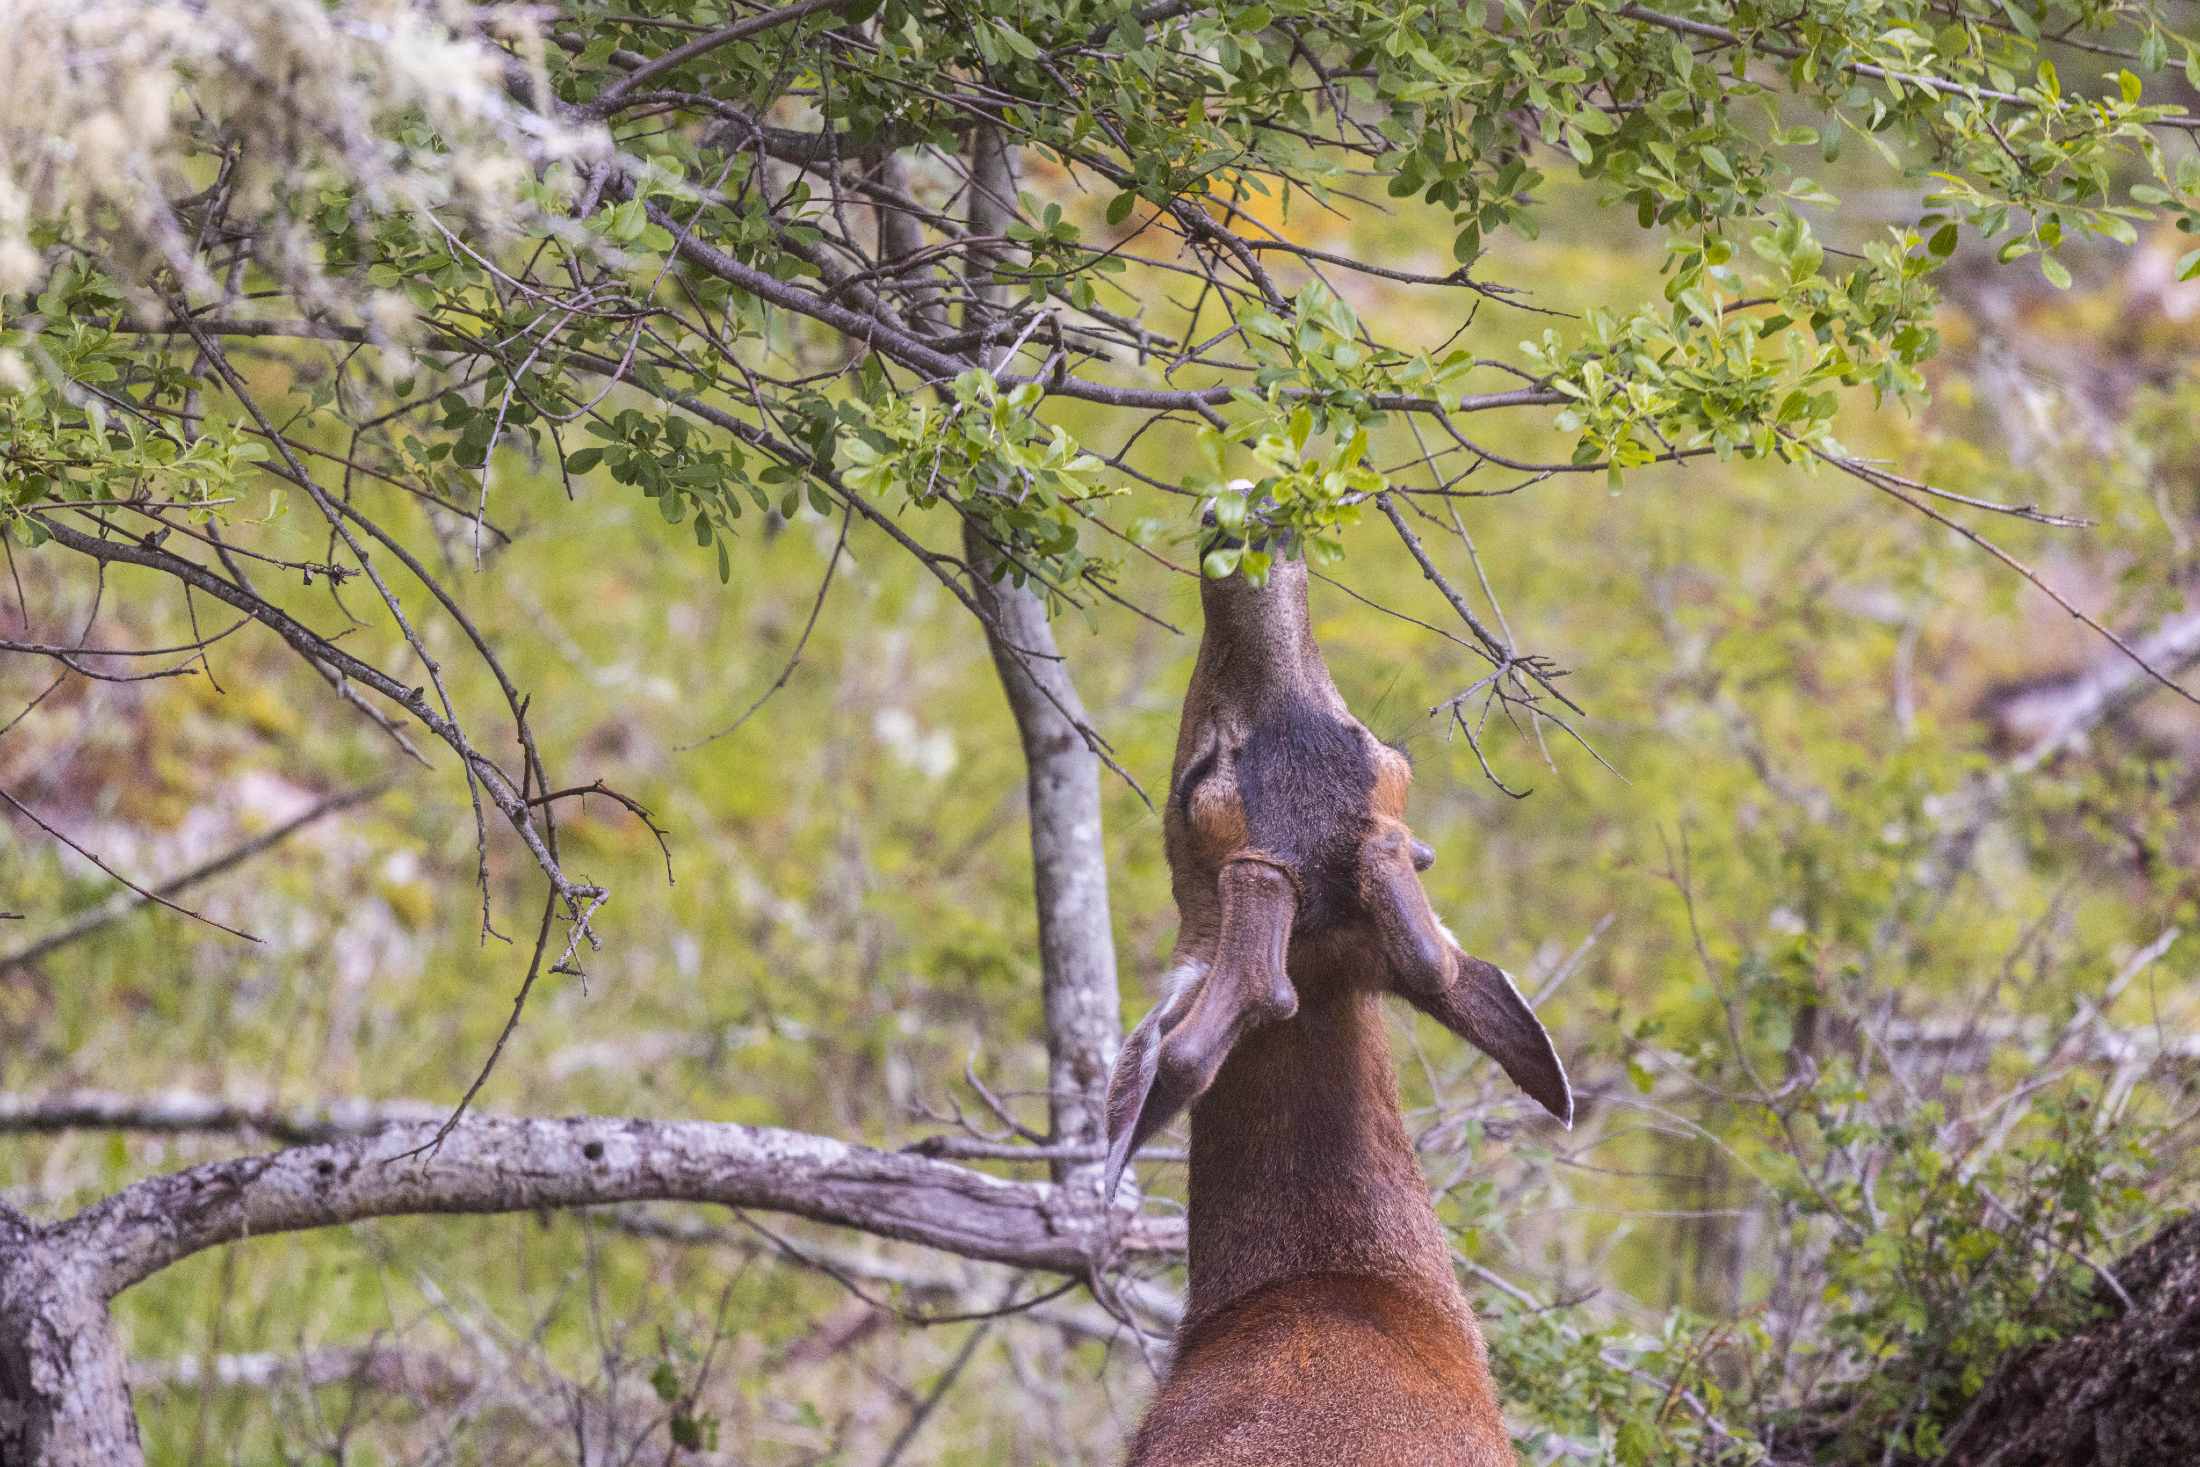 A deer reaching up to munch on vegetation.